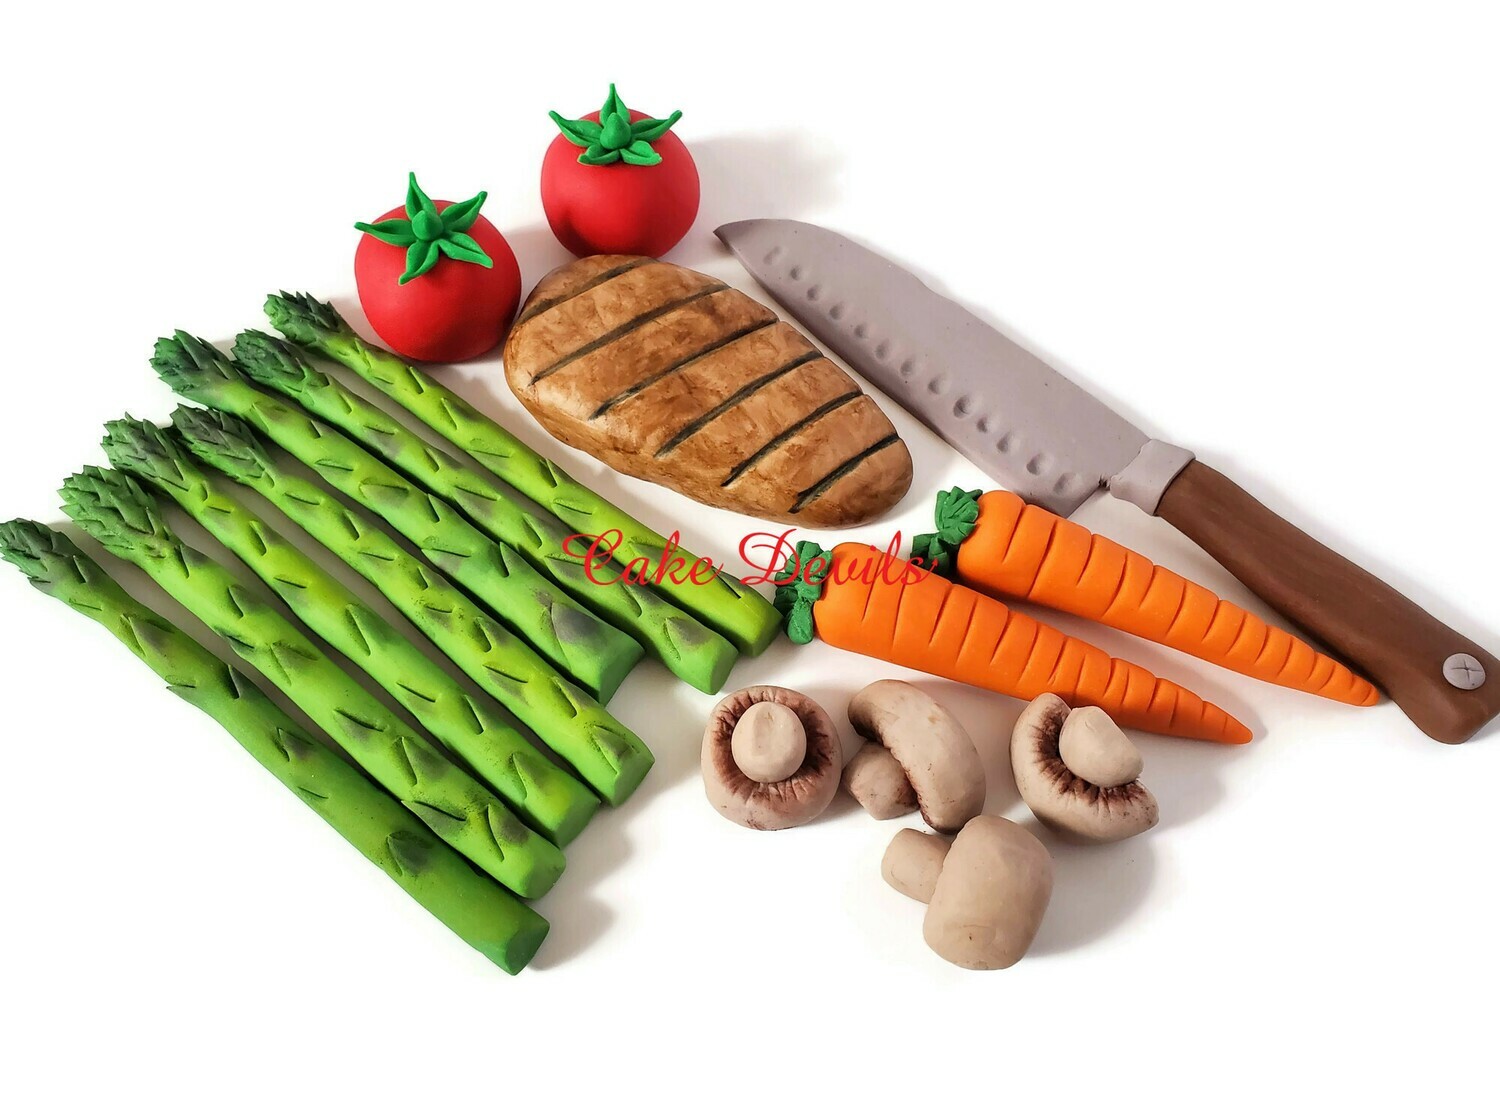 Chef's Cake Food Toppers, Fondant Chef's Knife cake Decorations, Fondant vegetables, chicken, carrots, Asparagus Cake, Tomatoes